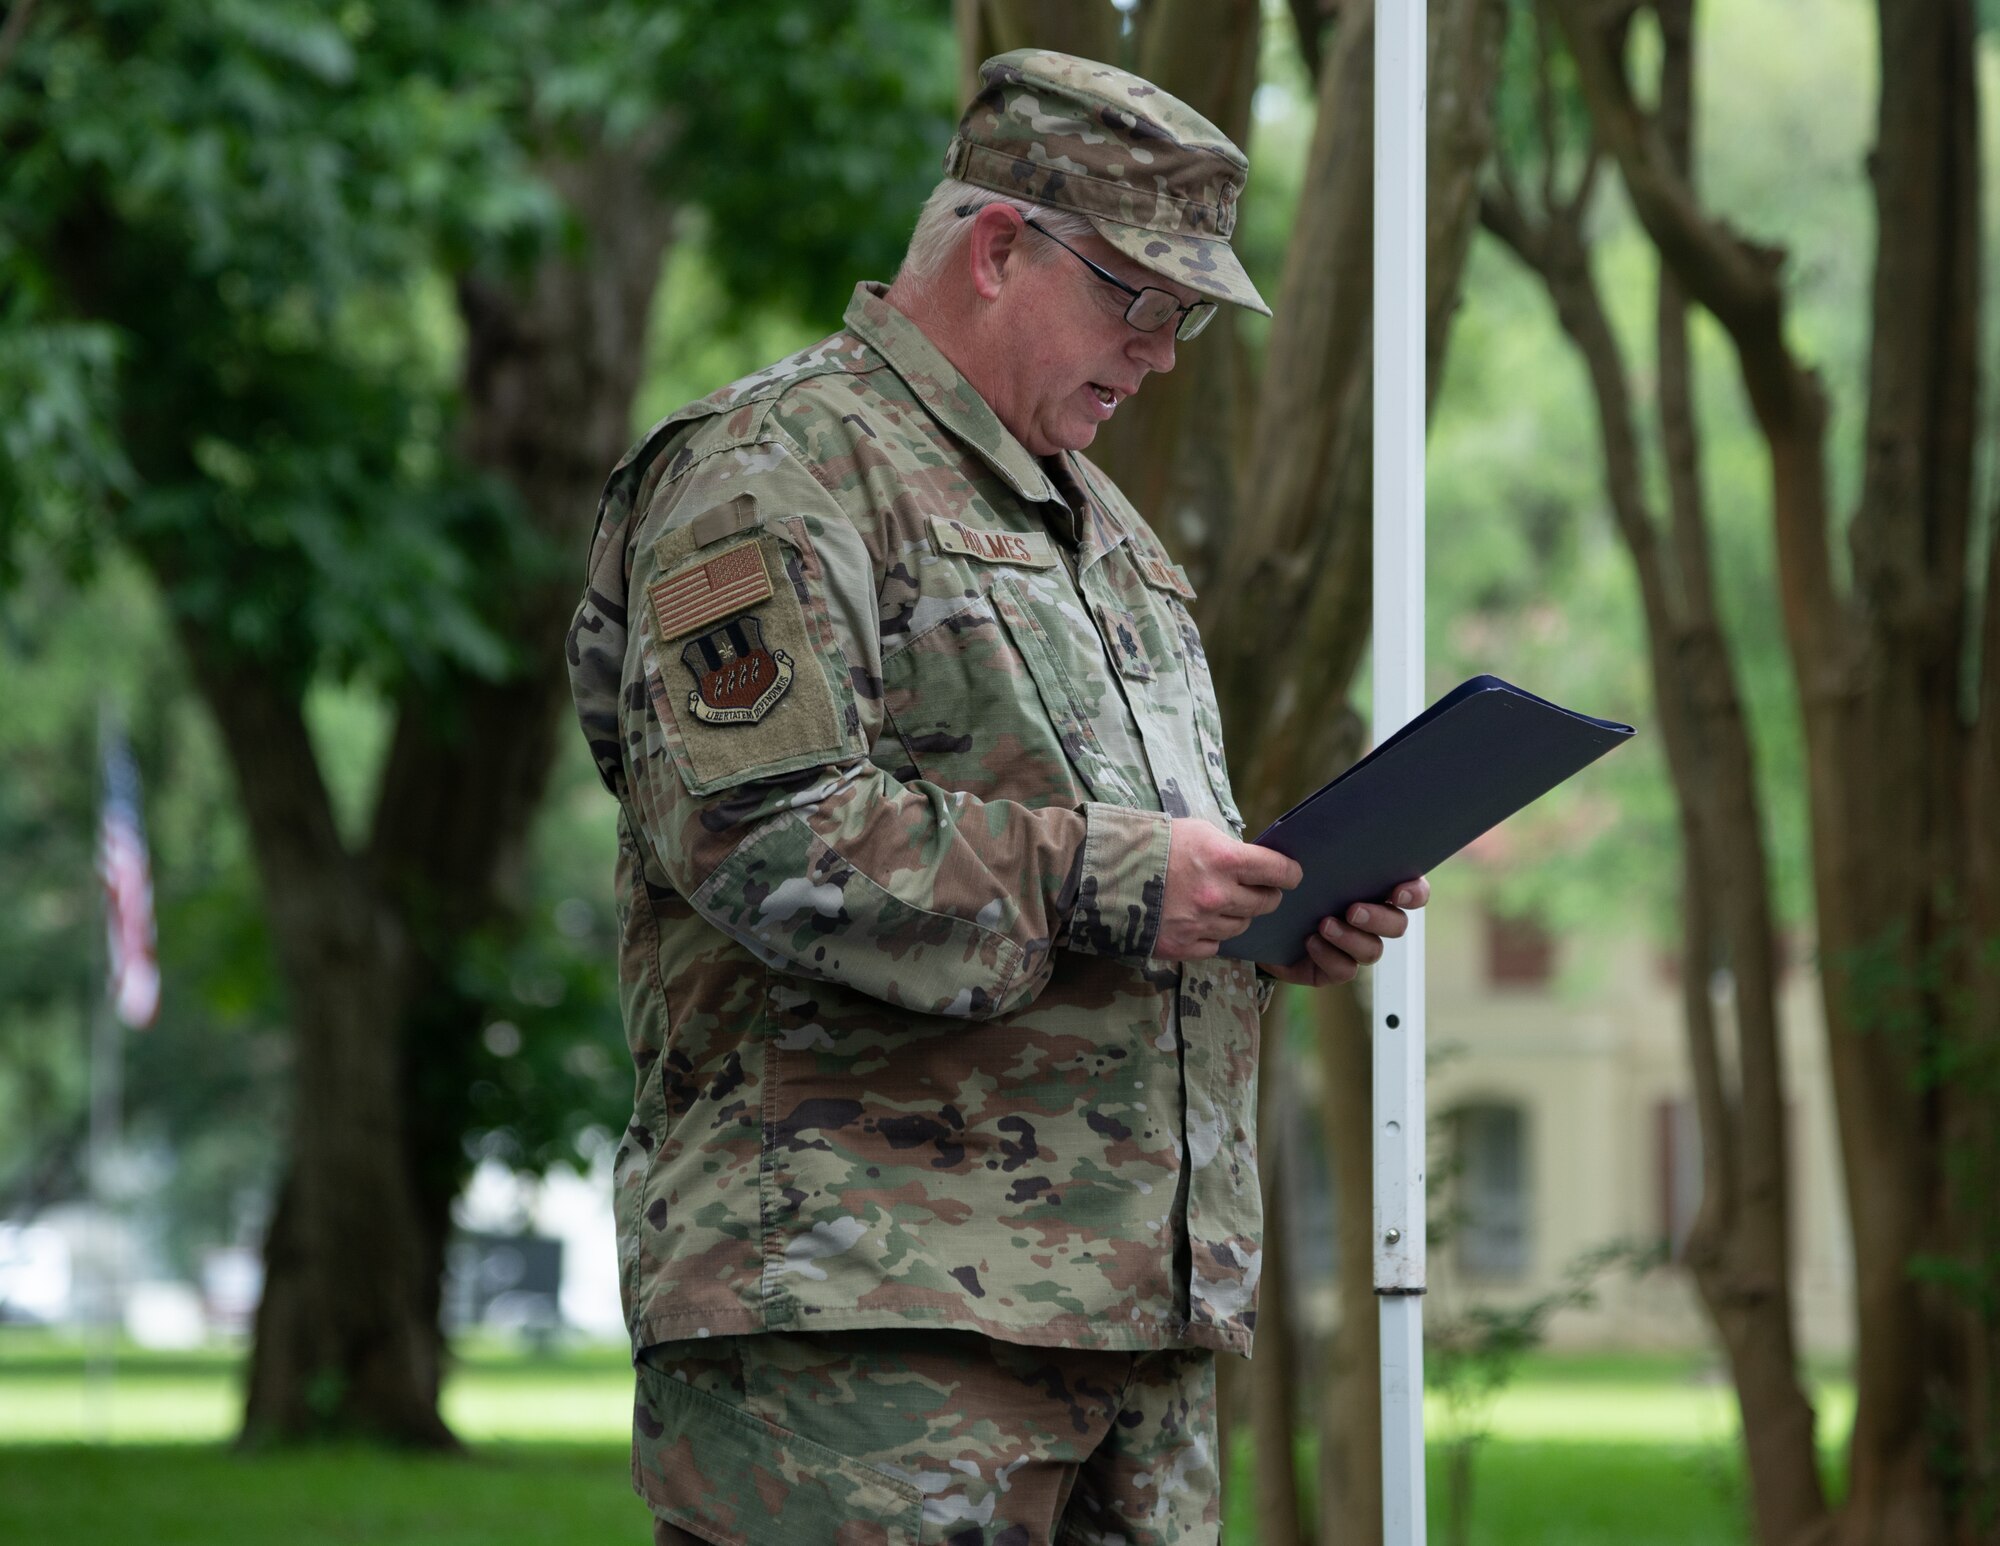 Lt. Col. Richard Holmes, 2nd Bomb Wing unit chaplain, delivers the invocation for the new community book exchange box at Barksdale Air Force Base, June 8, 2021. The exchange box is located on Chennault Avenue and is dedicated to honor Lt. Gen. Claire Chennault’s exemplary service.